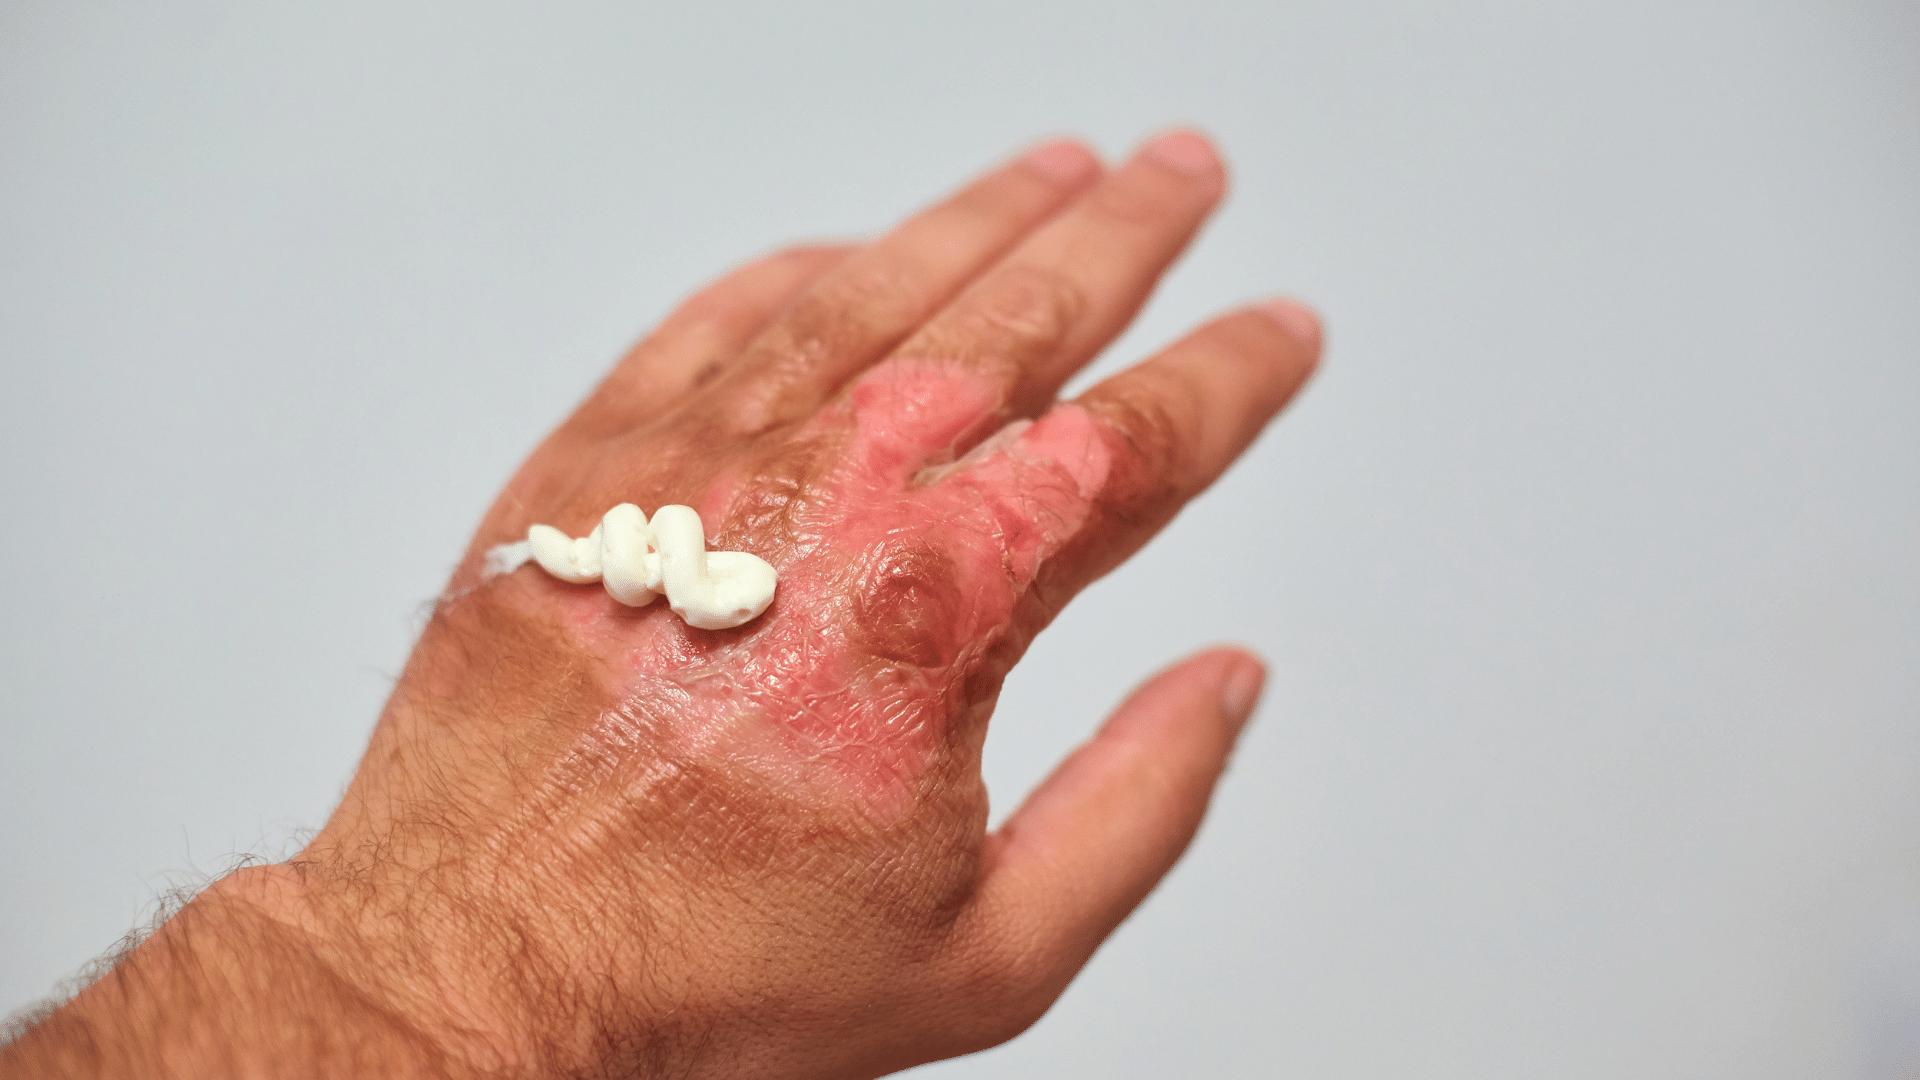 Ointment on Burn on Hand.